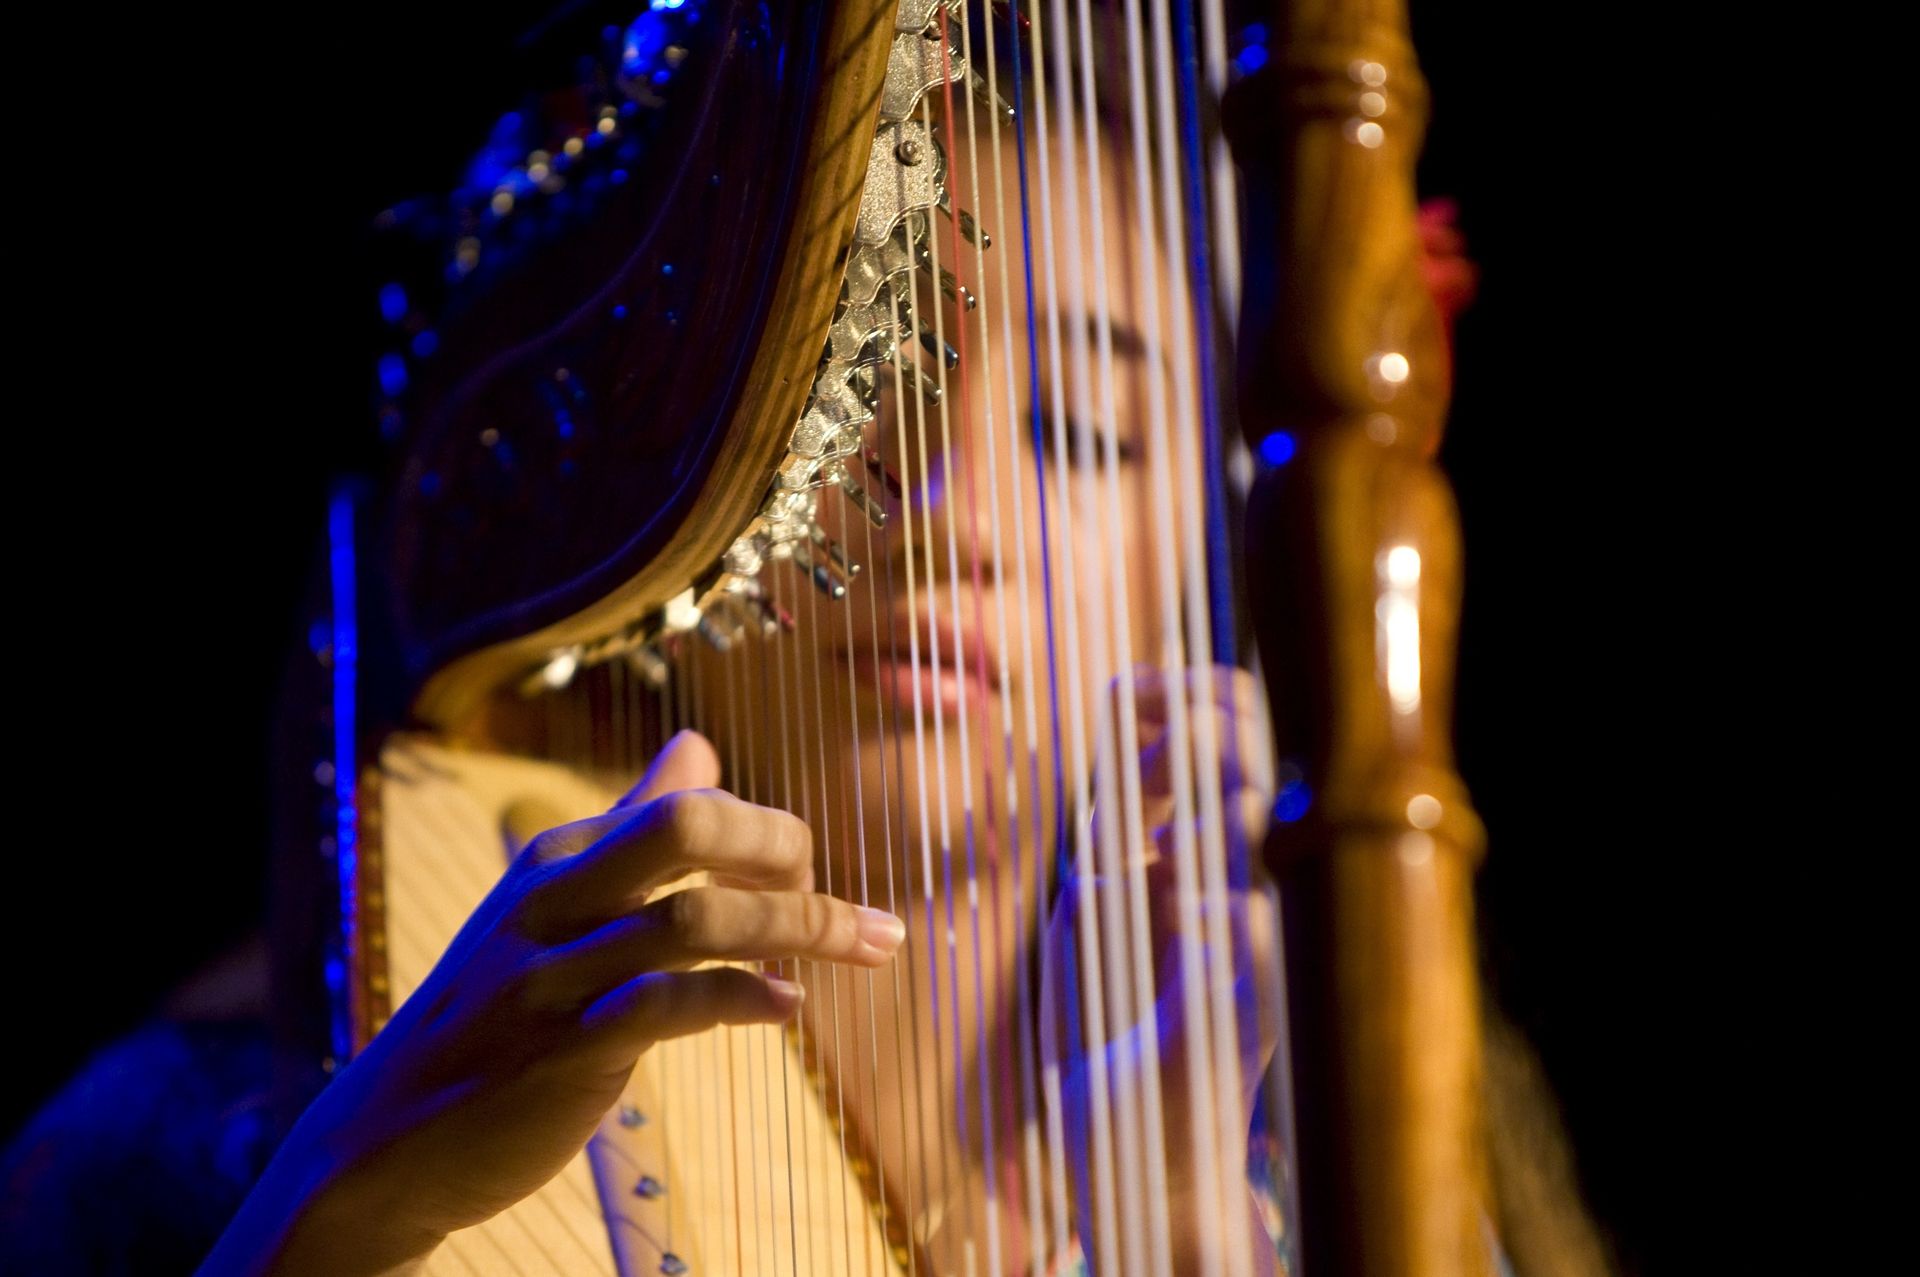 A young woman plays the harp during a performance.